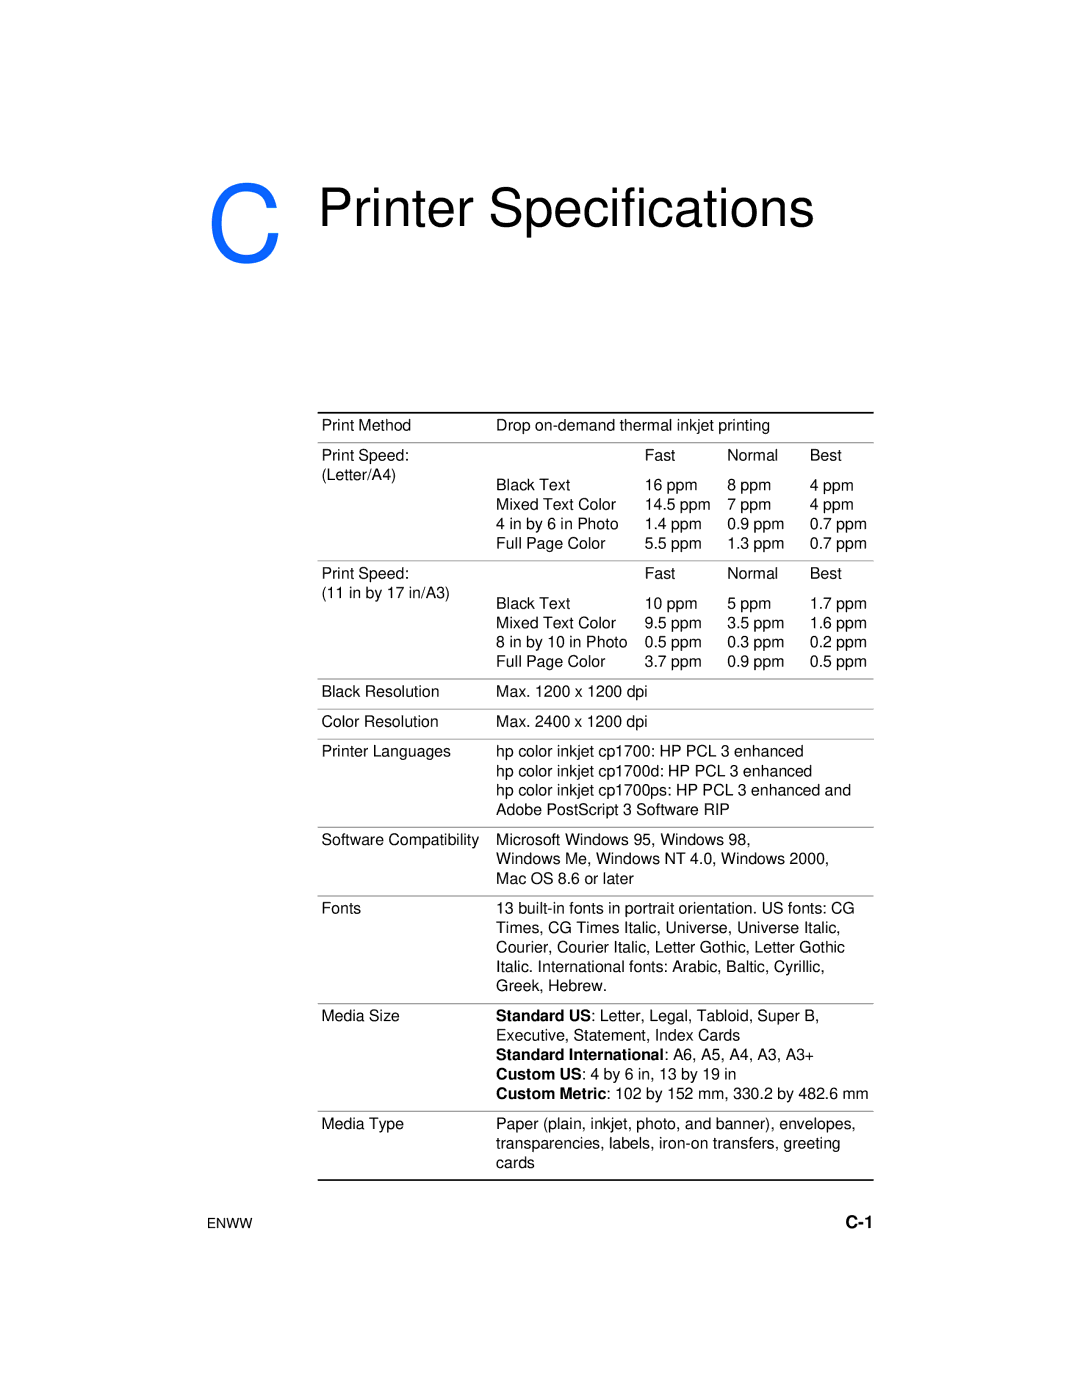 HP Color Inkjet cp1700 manual Printer Specifications, Standard International A6, A5, A4, A3, A3+ 